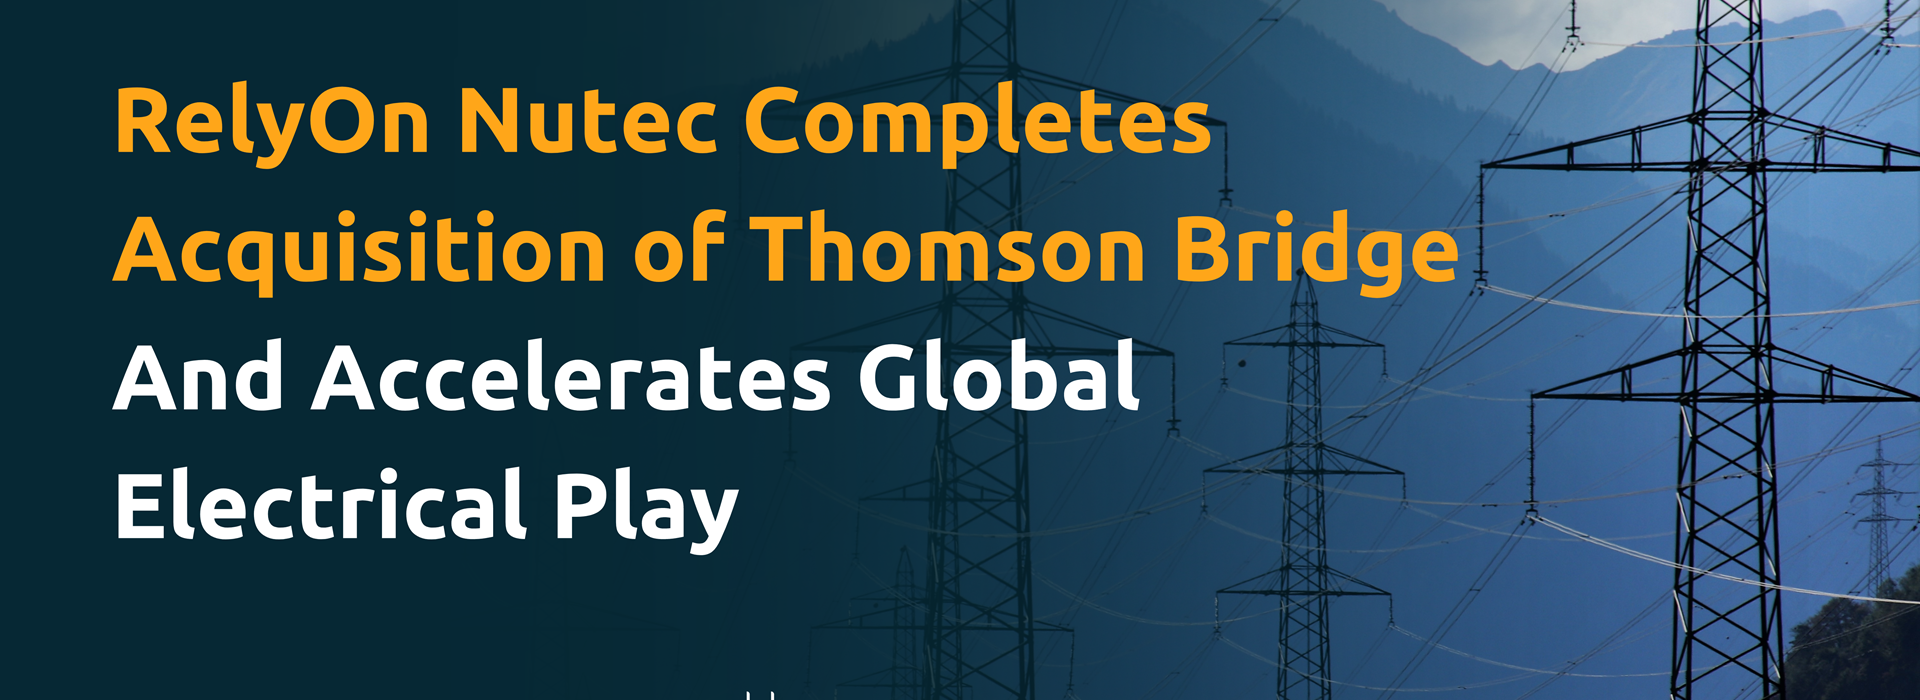 Relyon Nutec Completes Acquisition Of Thomson Bridge And Accelerates Global Electrical Play (2)